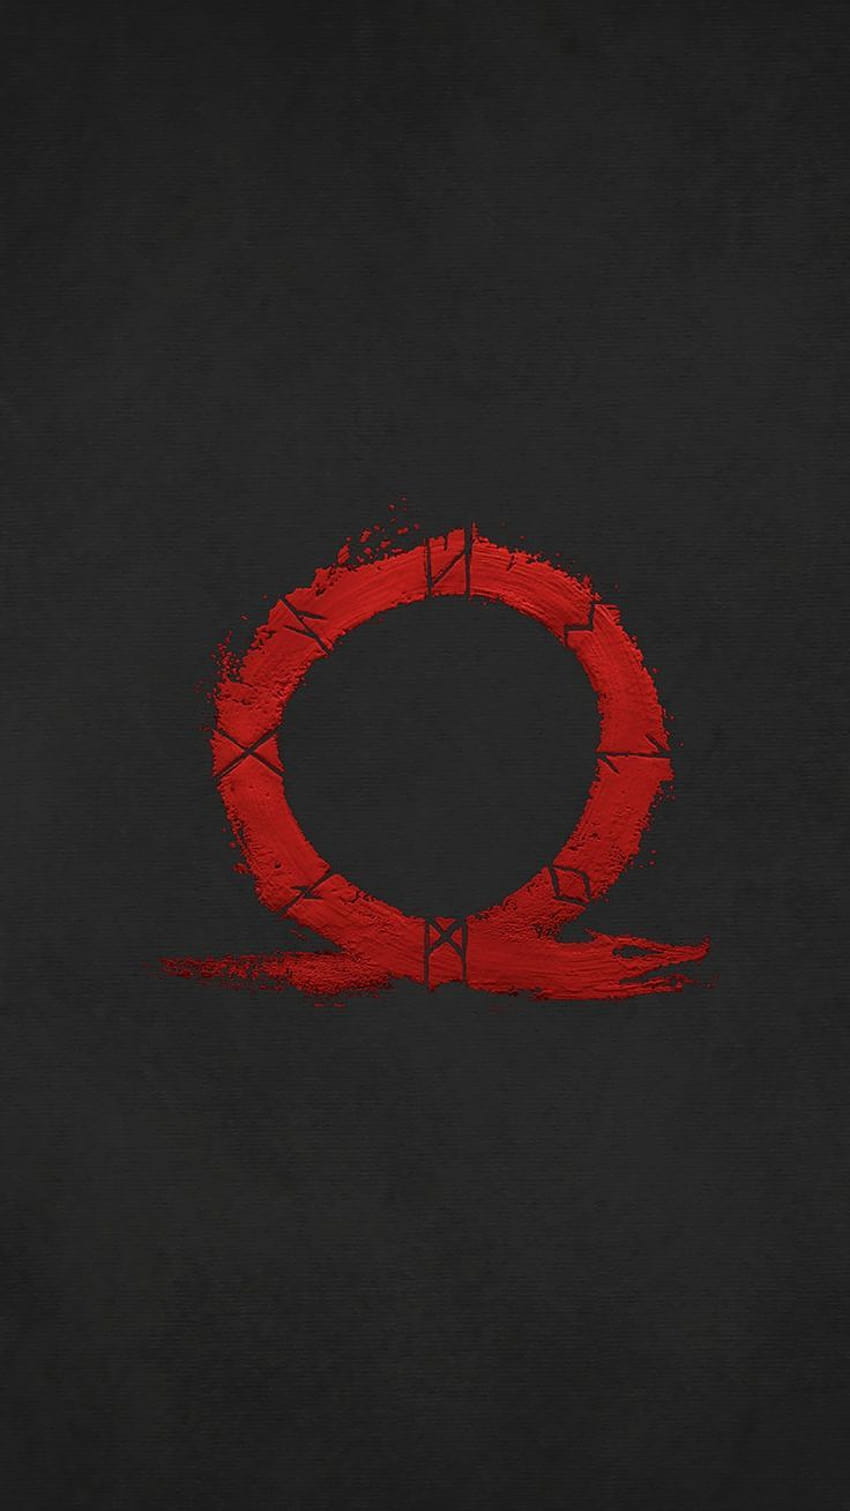 Not in the same order as Tyrs wall but the same symbols My first tattoo   I figured Id share this on a thread that fits  rGodofWar